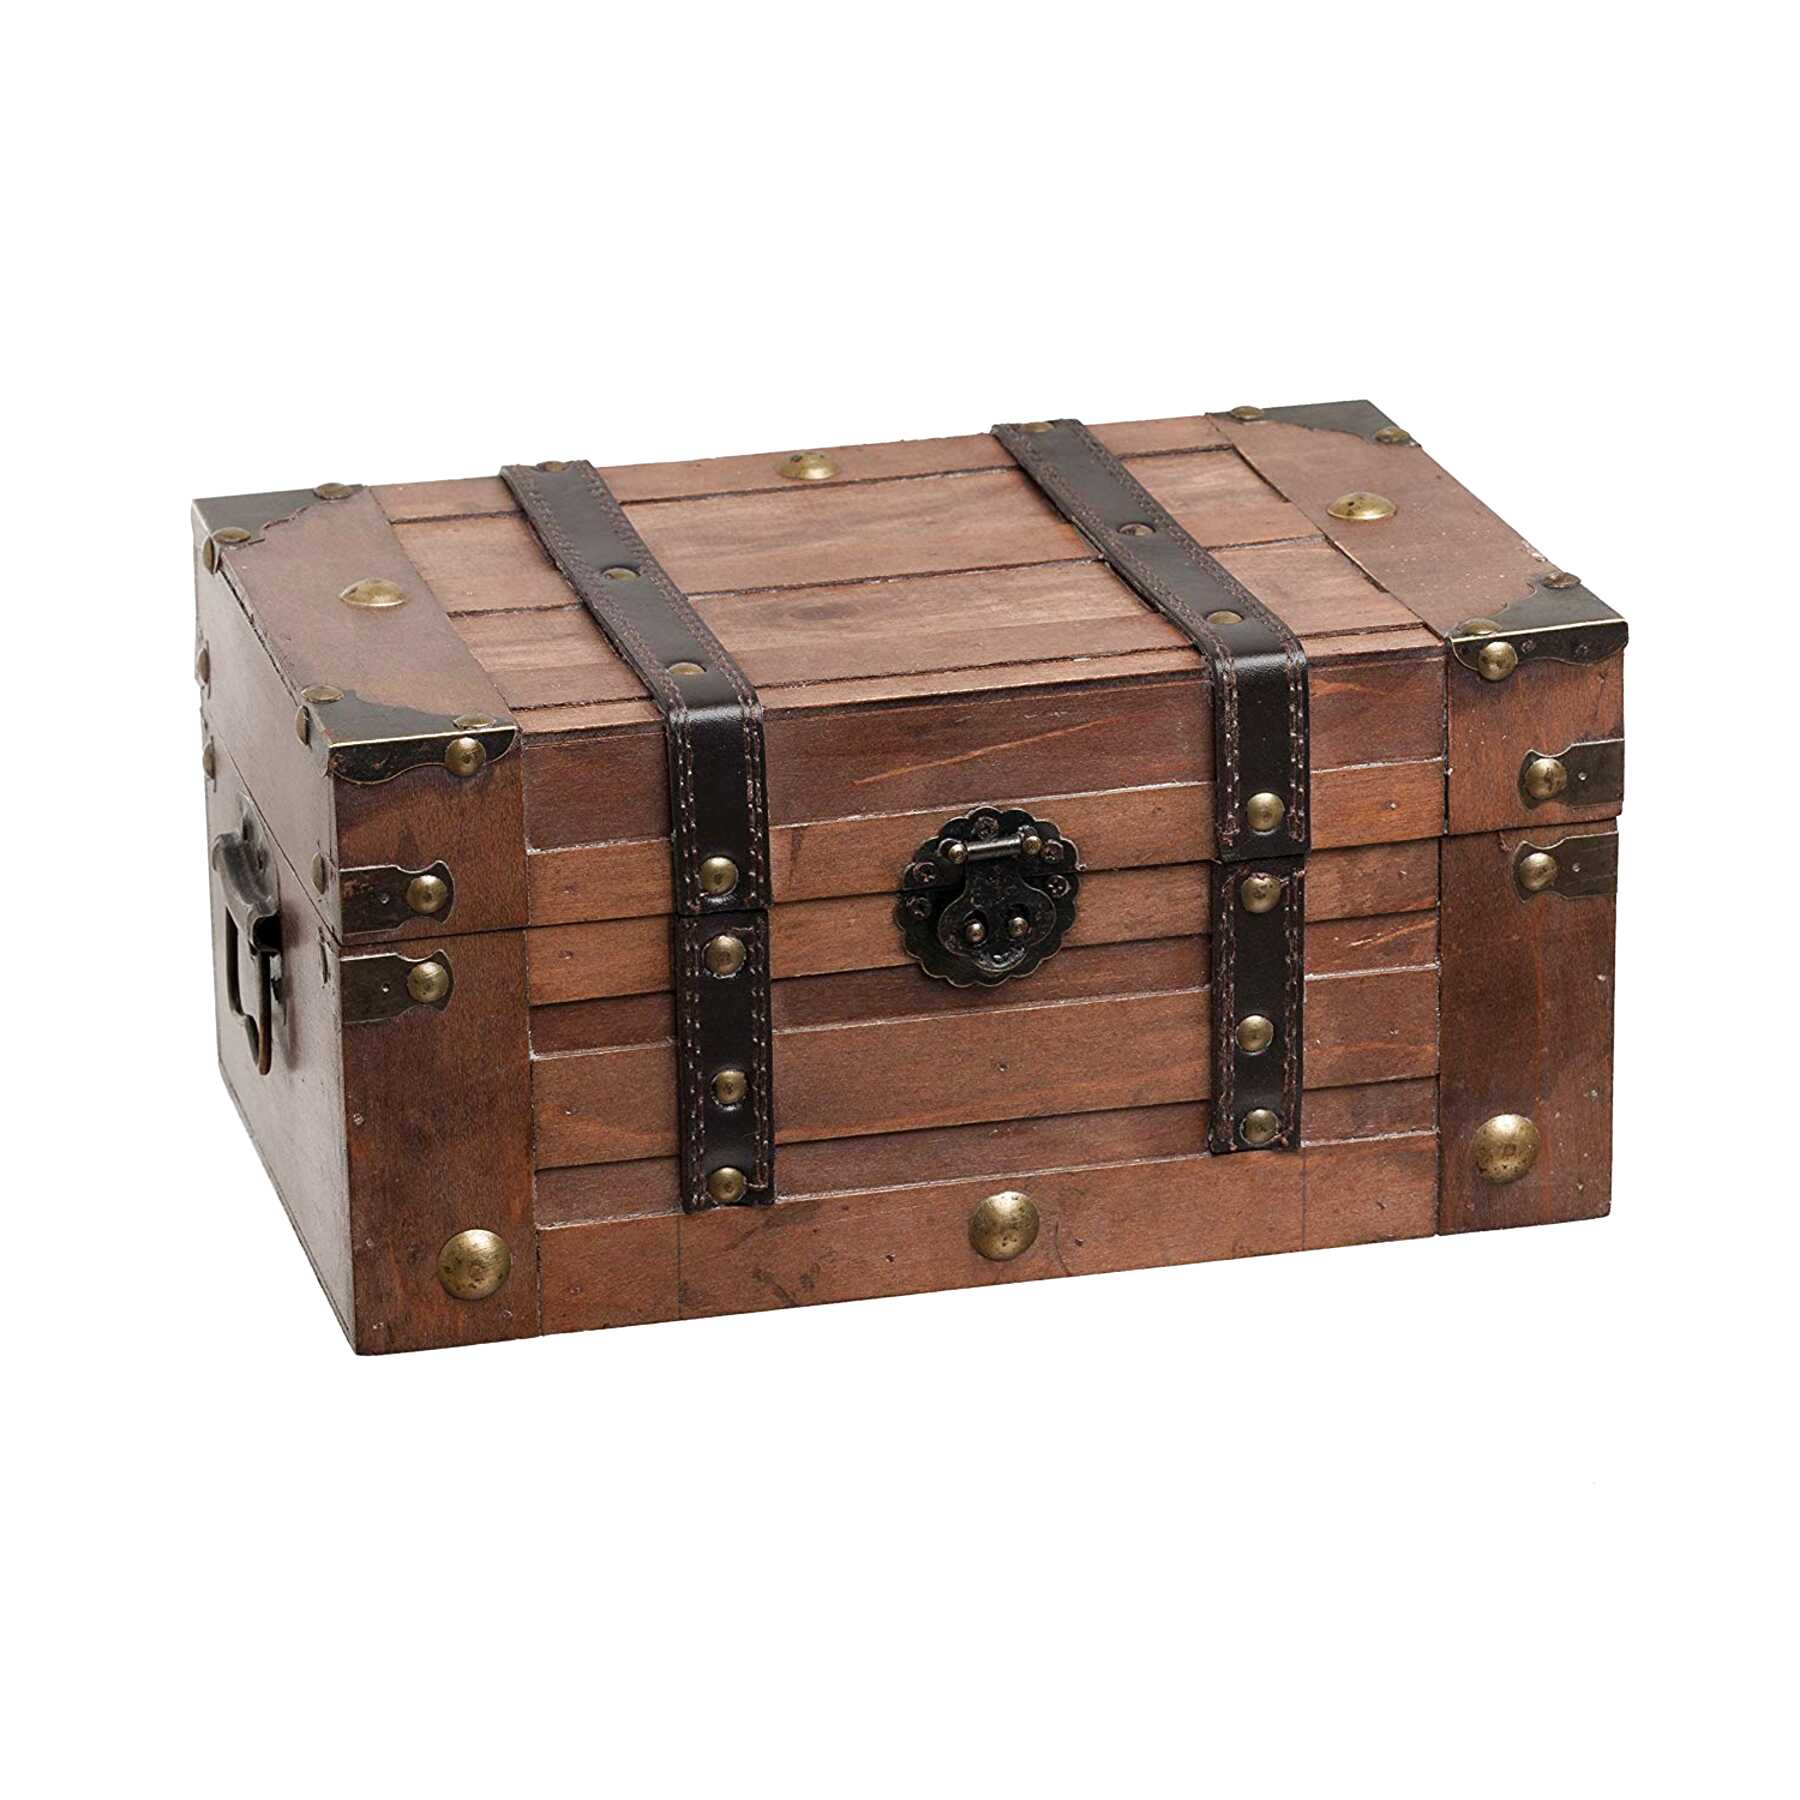 Wooden Trunk for sale in UK | 71 used Wooden Trunks